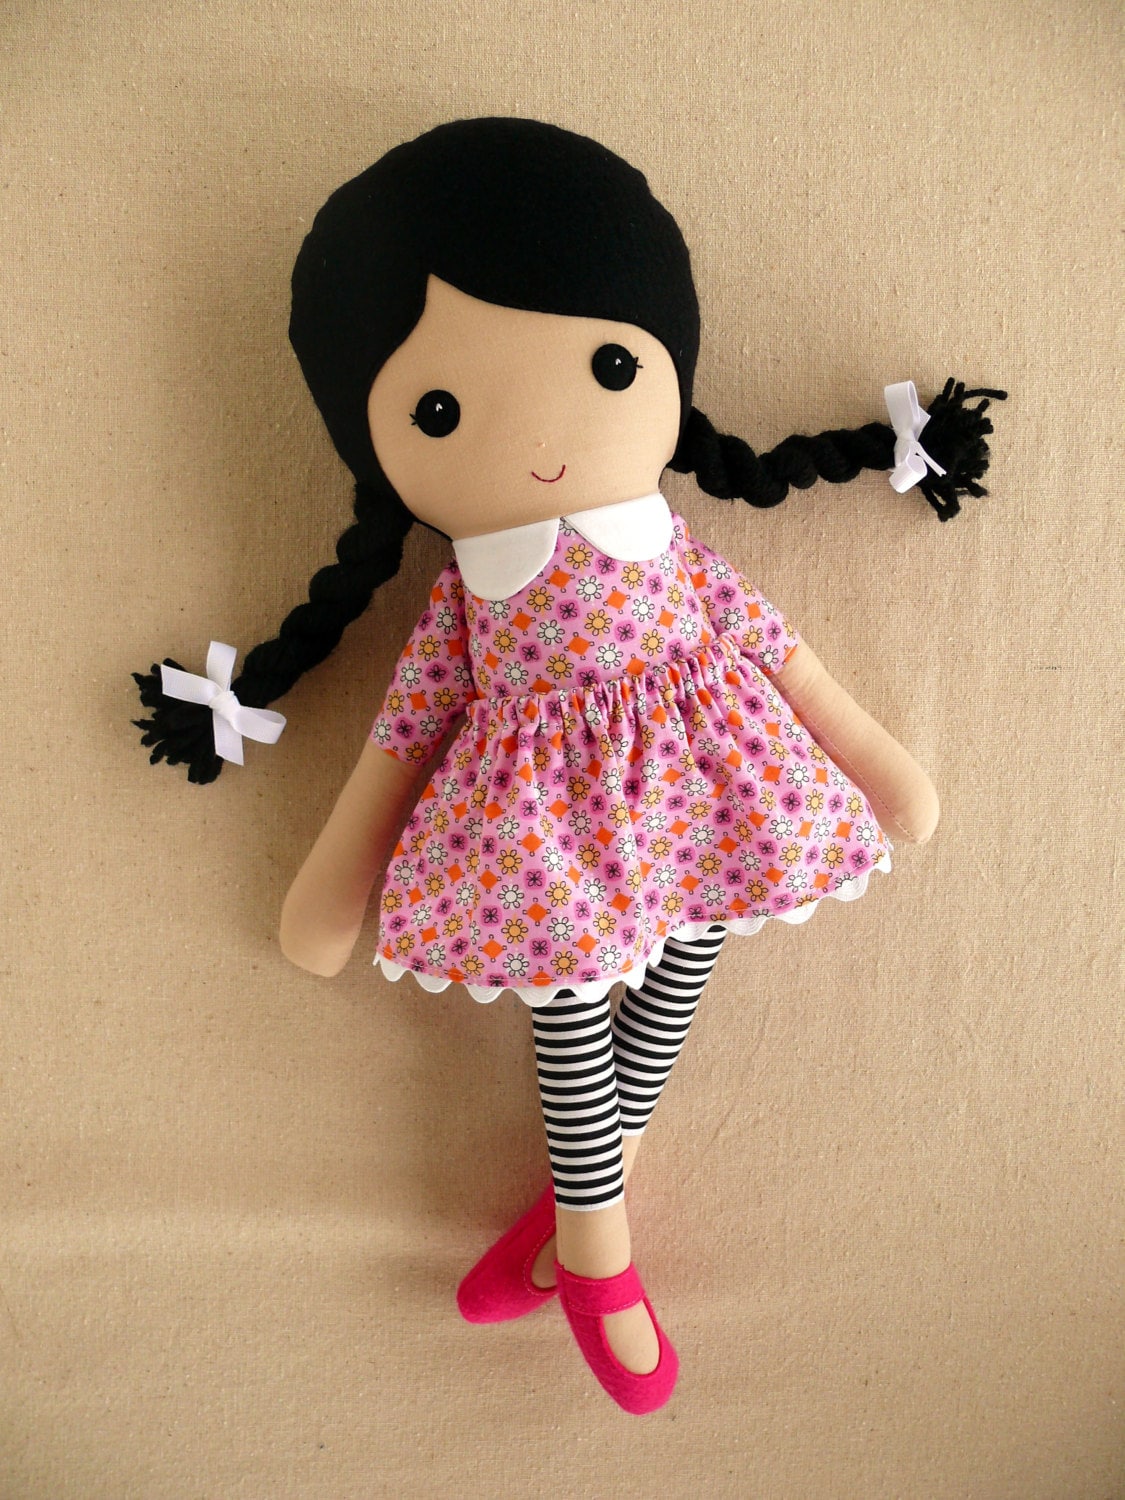 Fabric Doll Rag Doll Black Haired Girl In Pink Print Dress